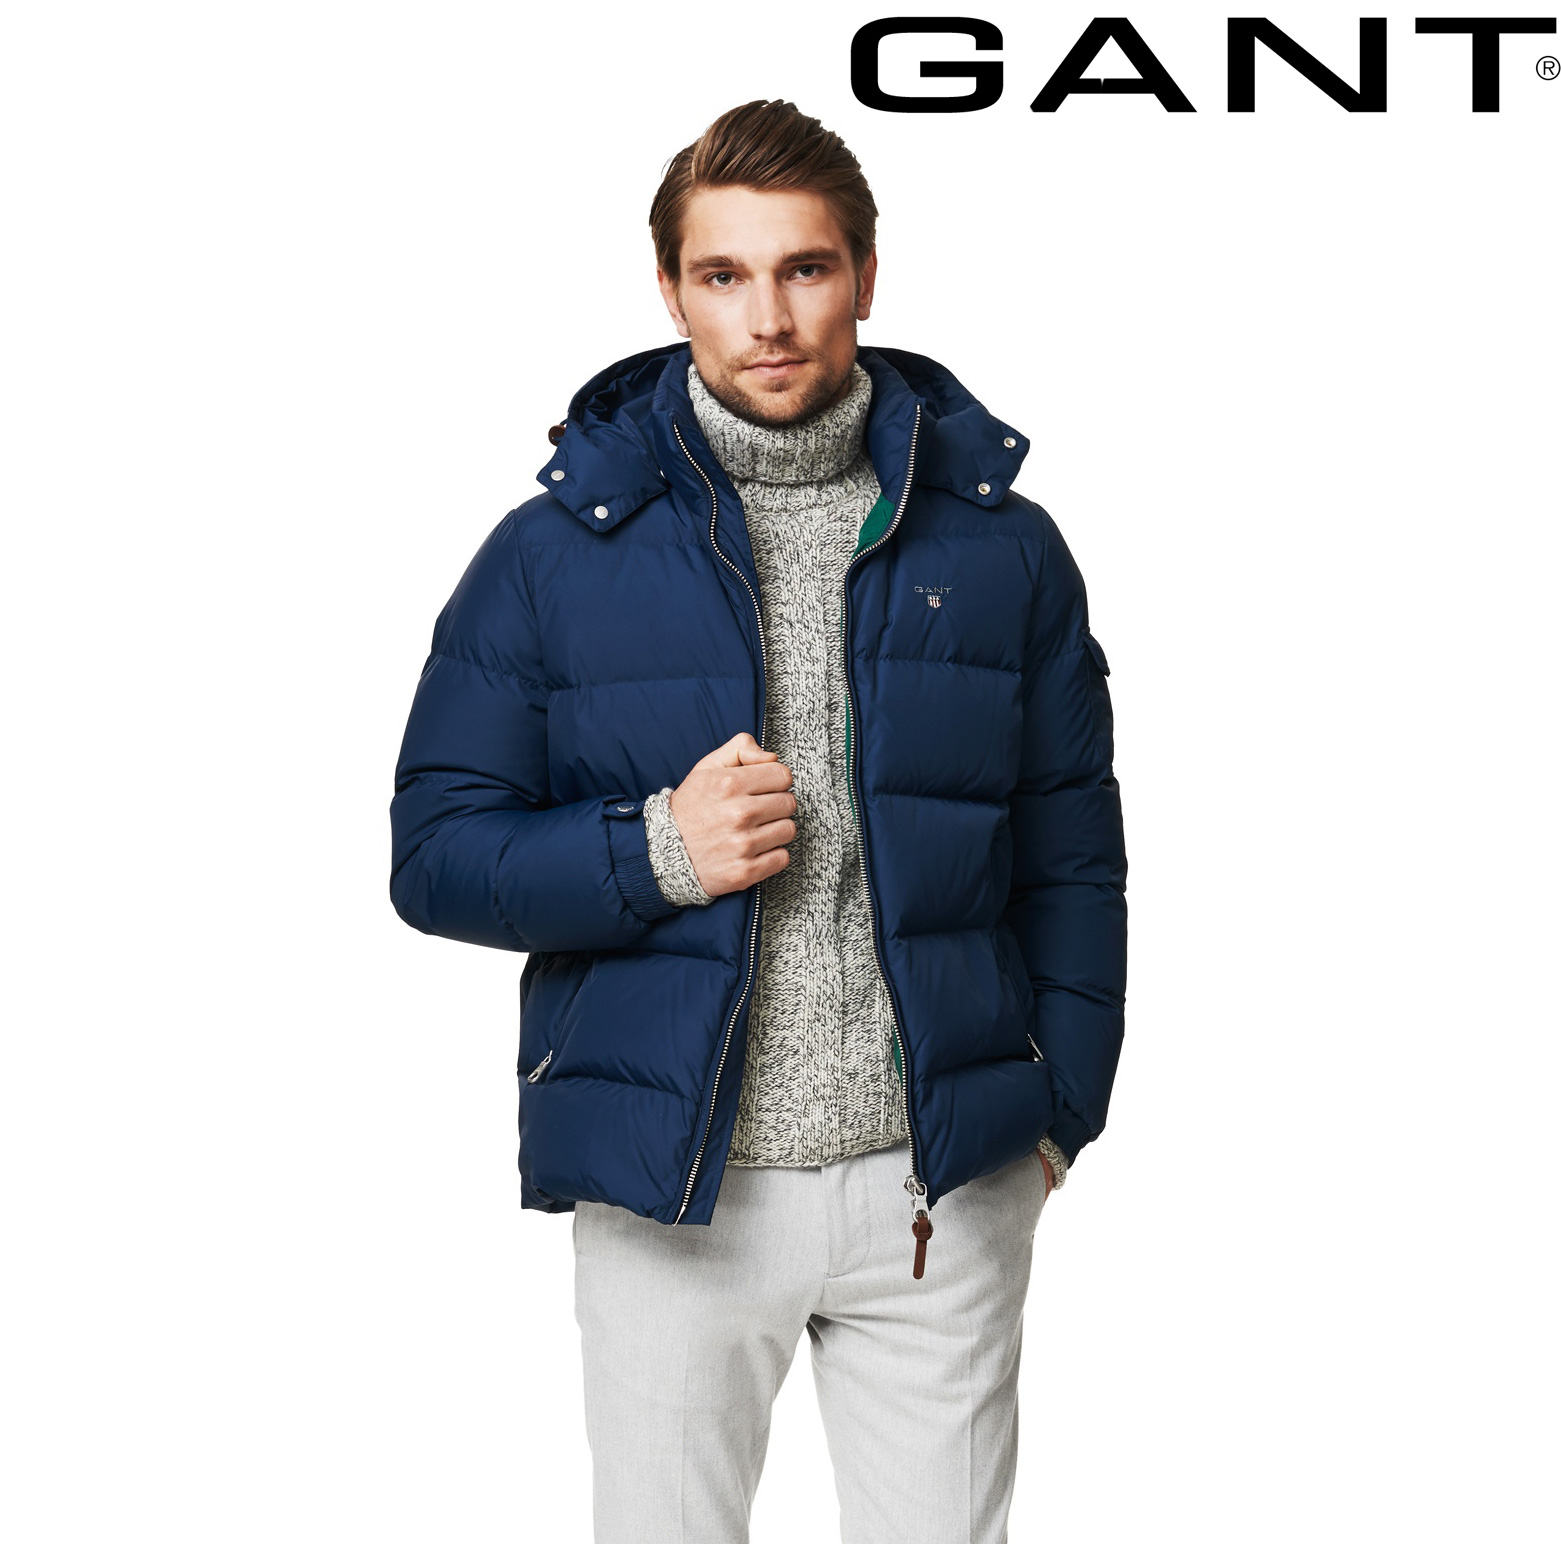 Gant Winter Jackets in various styles